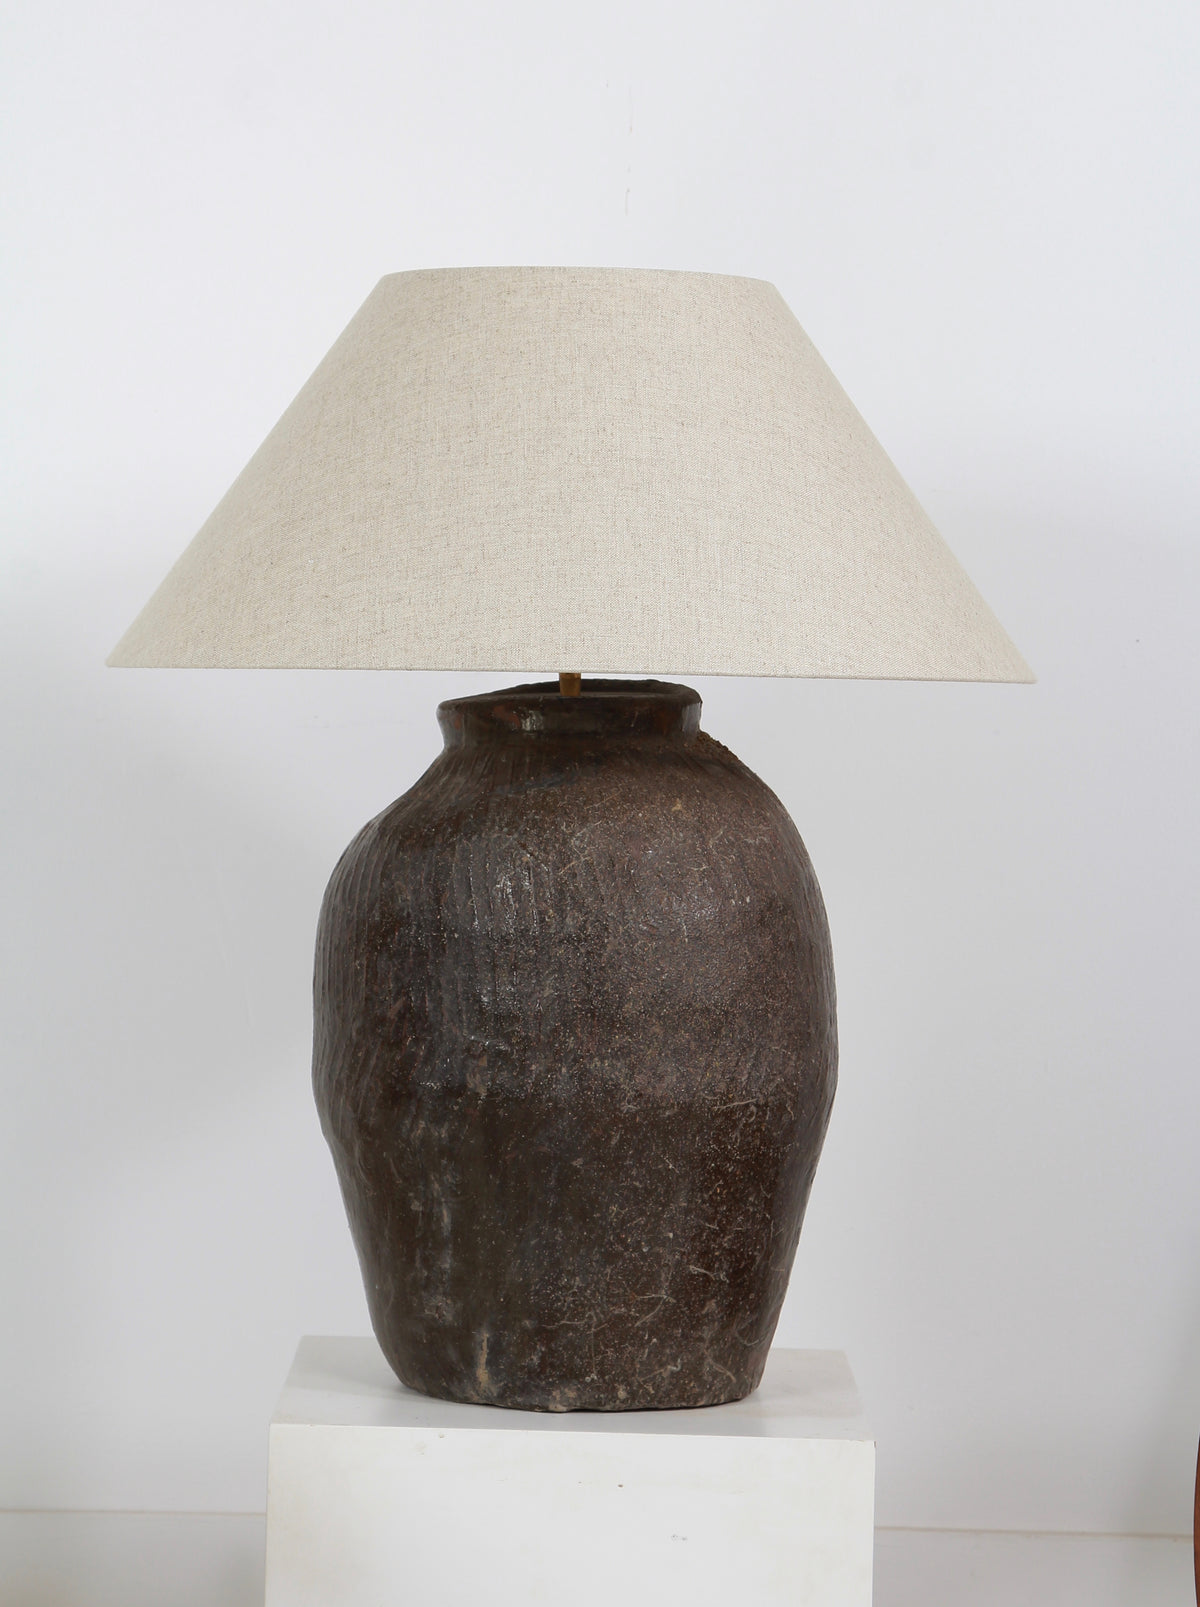 XL Glazed Rustic Earthenware Storage Pot Lamp with Natural Linen Shade